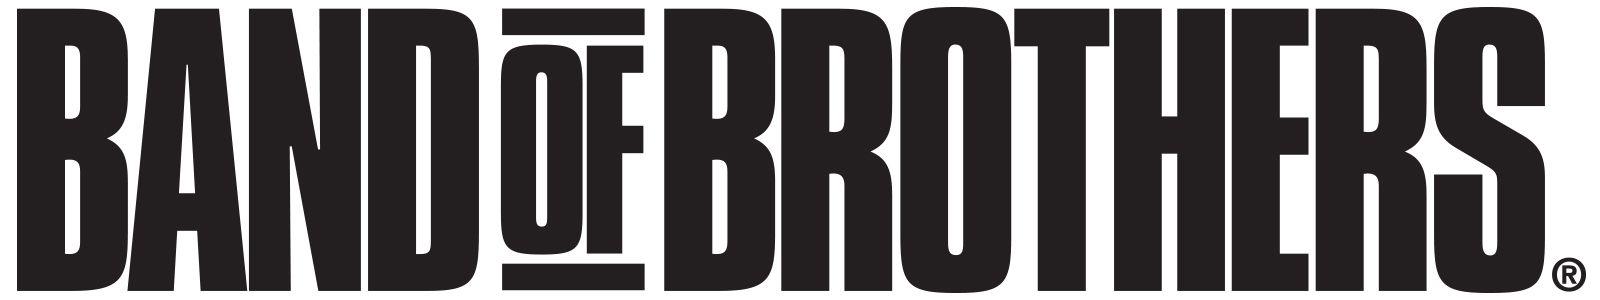 Band of Brothers Logo - Band of Brothers - Official Website for the HBO Series